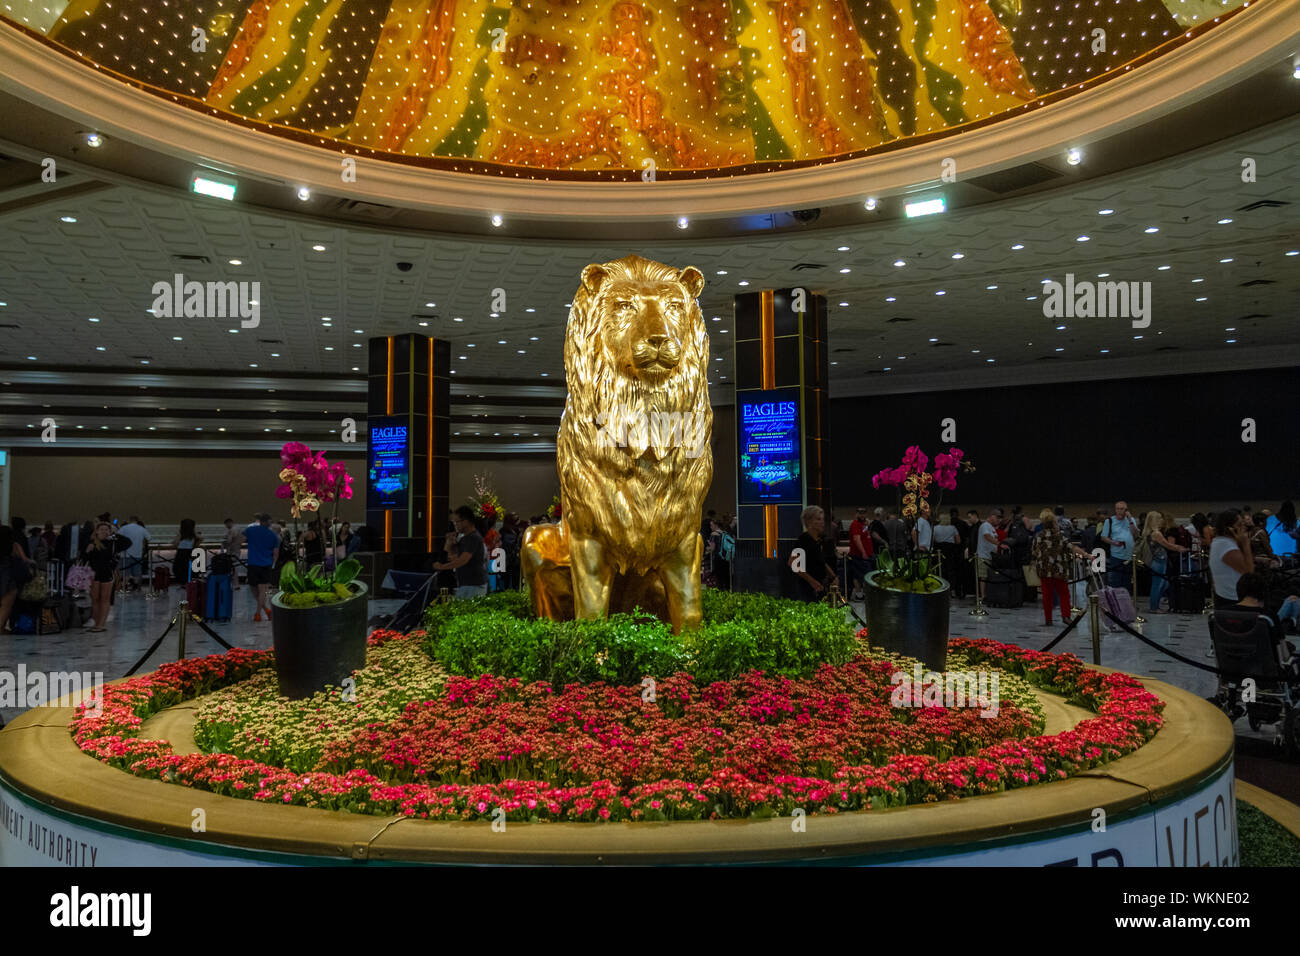 Las Vegas, Nevada / USA – May 11, 2019: The MGM Lion in the main lobby of the MGM Grand Hotel and Casino in Las Vegas, Nevada. Stock Photo